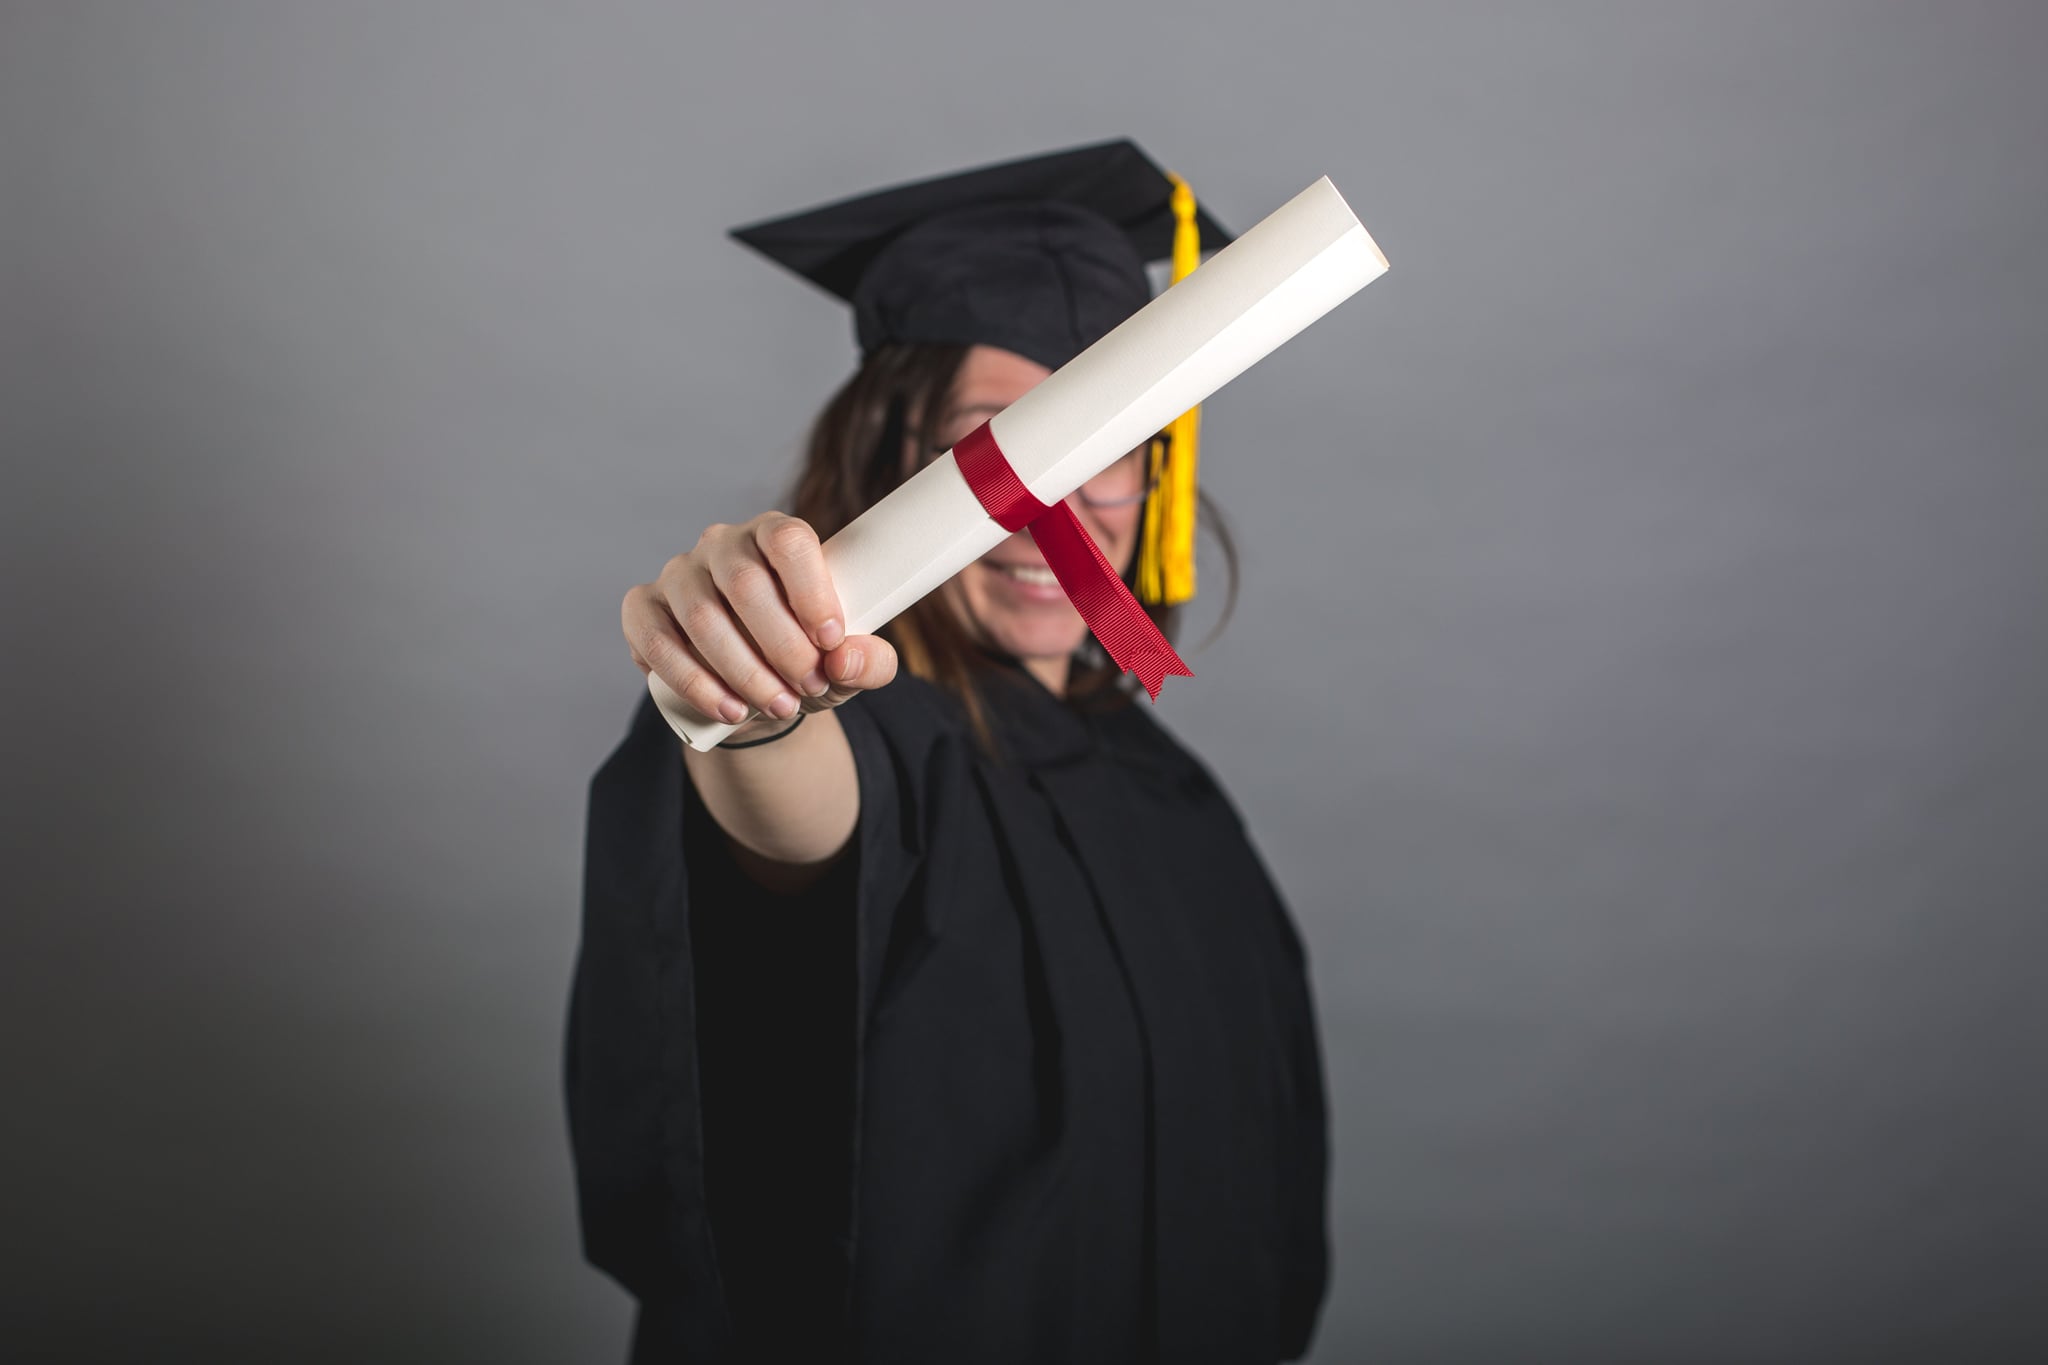 tmp_oxeavi_8c9ae543017ee04d_female-grad-student-holding-out-diploma.jpg